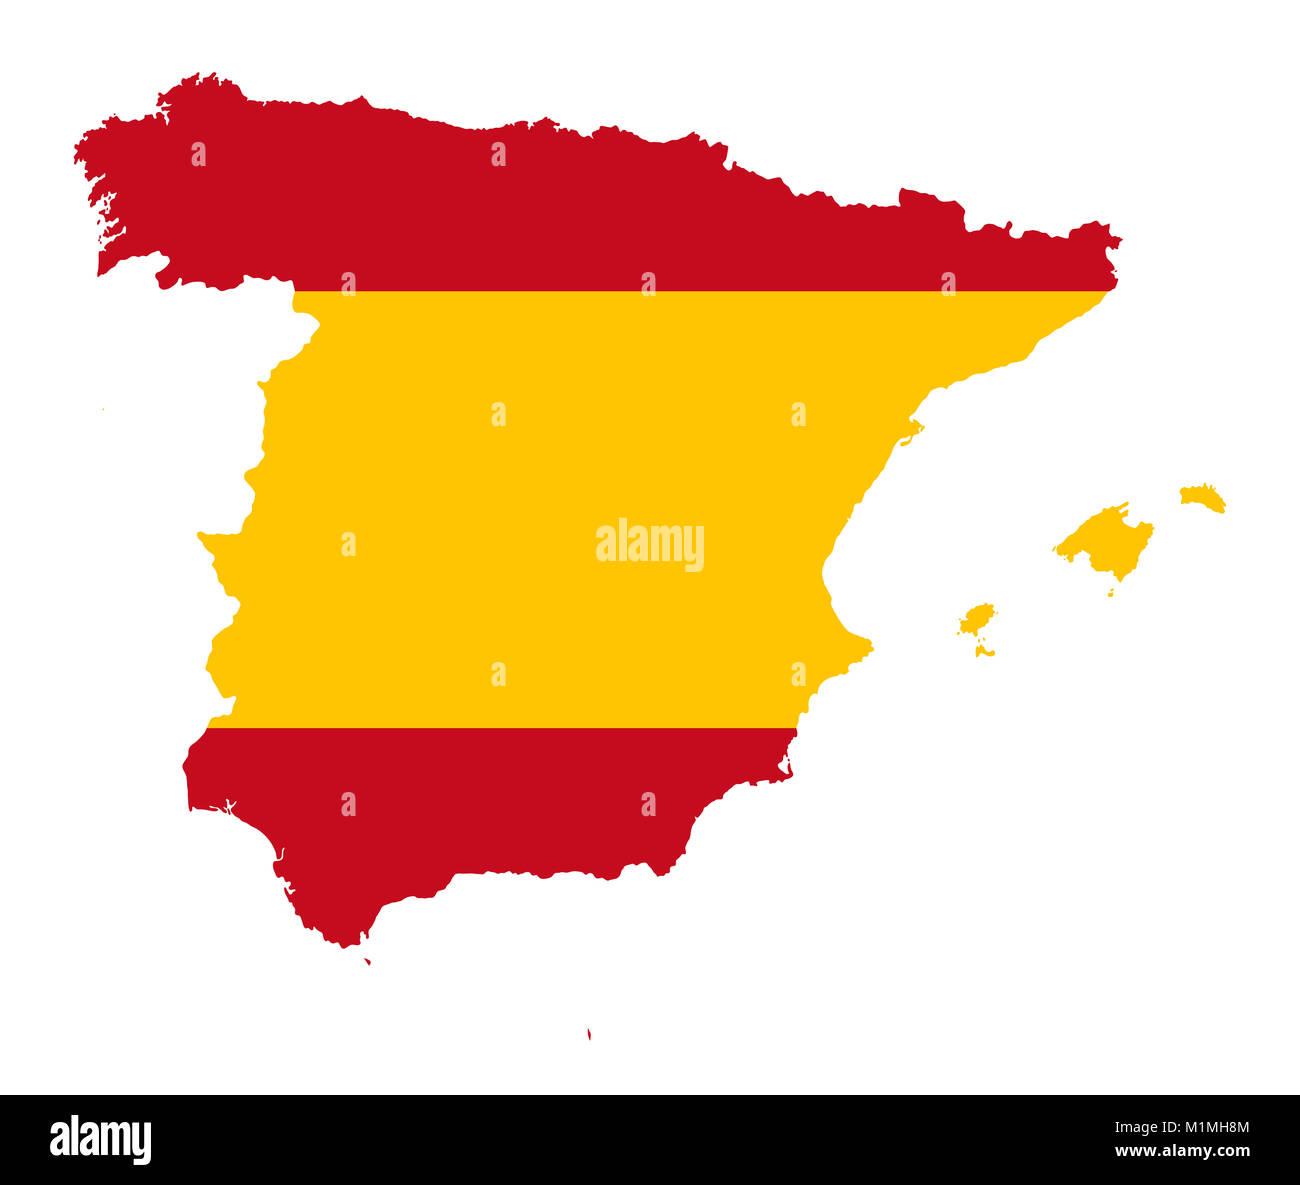 Kingdom of Spain. Flag in silhouette of the country. Landmass and borders as outline. The colors of the nation. Banner with red and yellow stripes. Stock Photo